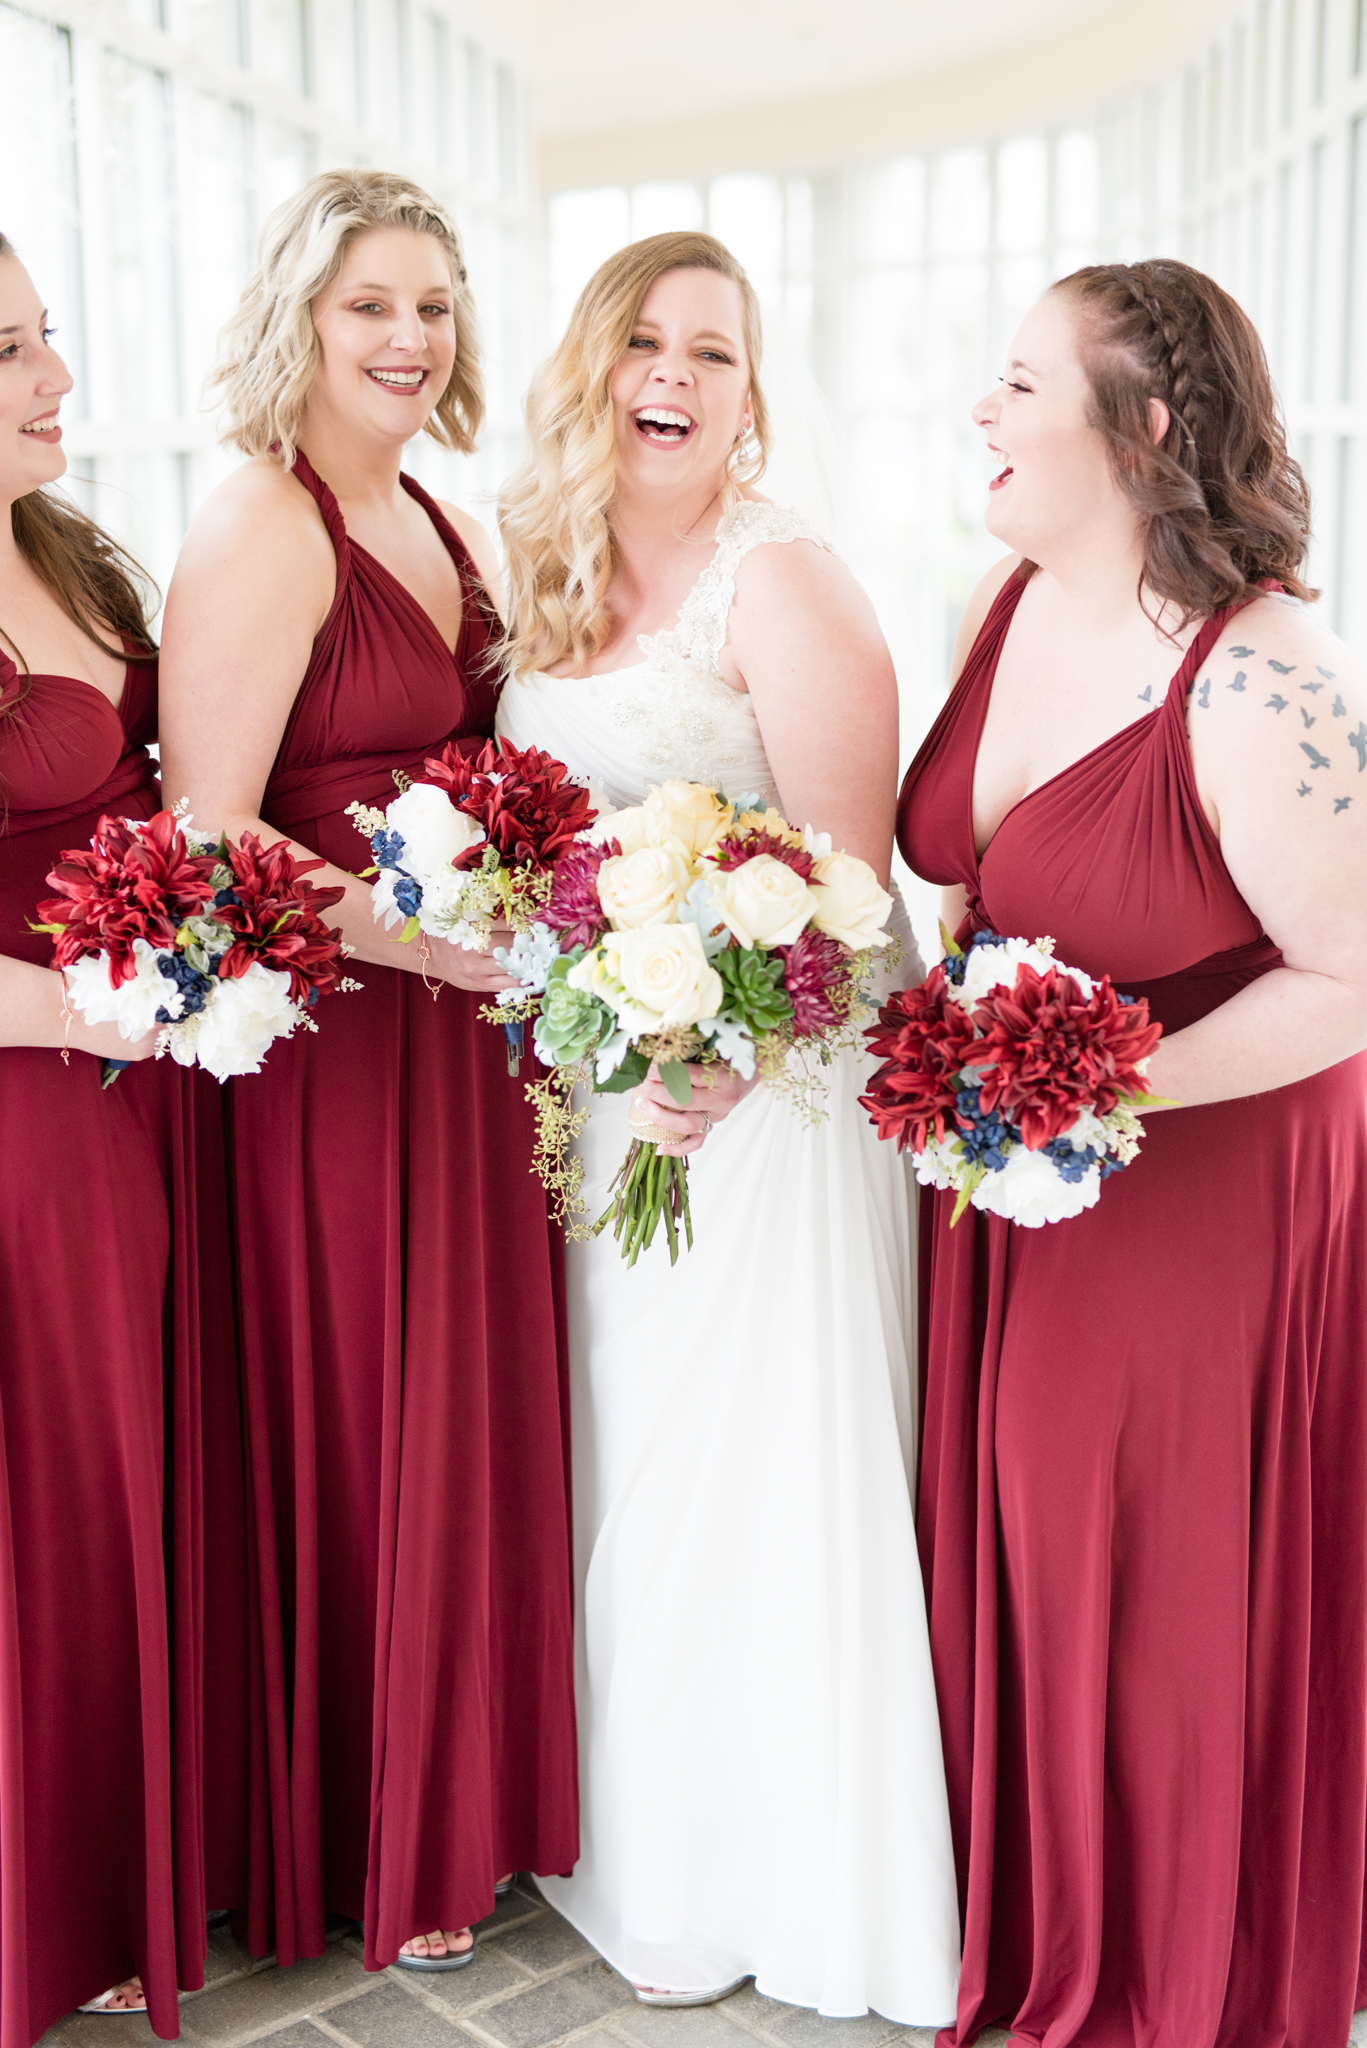 Bride laughs surrounded by bridesmaids.